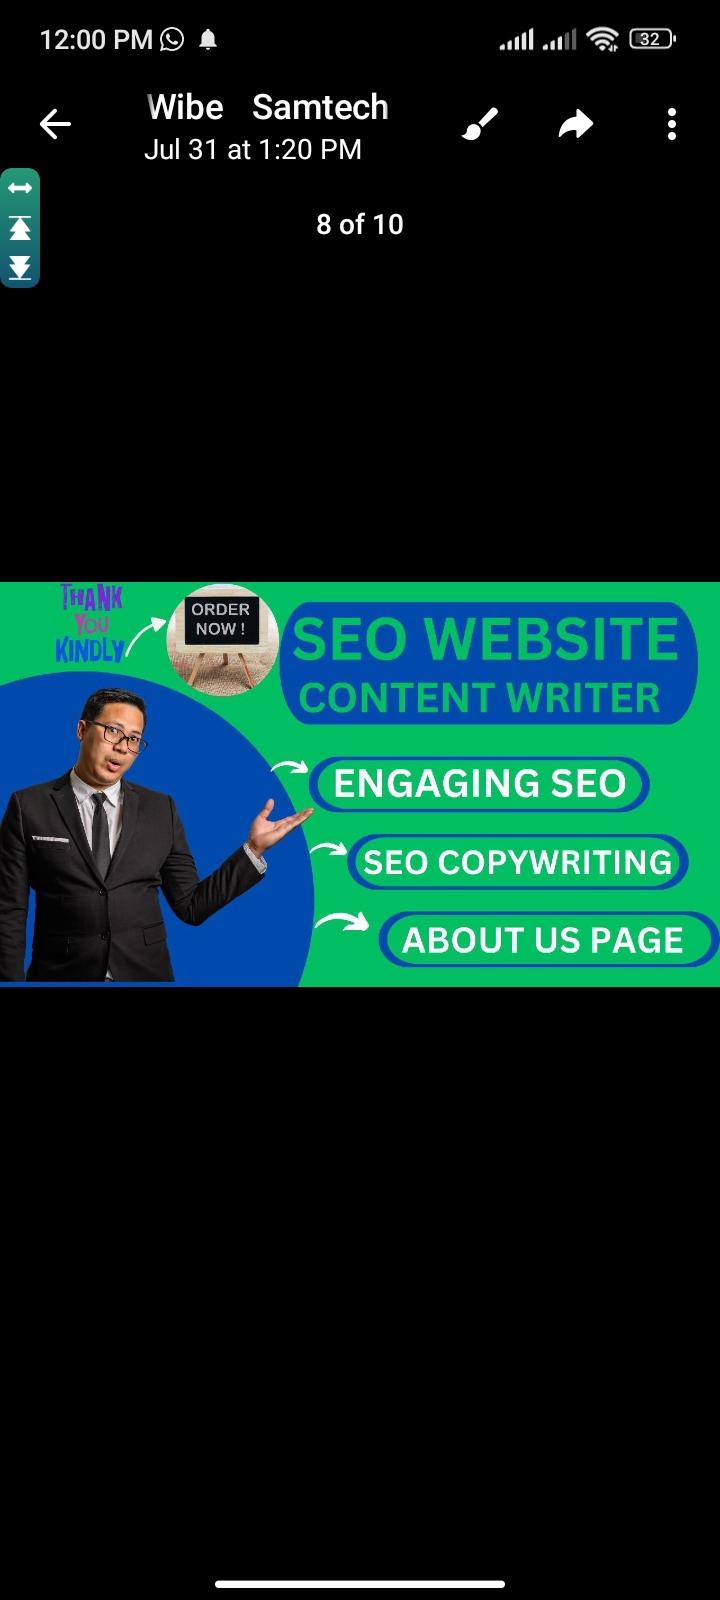 Engage SEO website, copywriting about us page